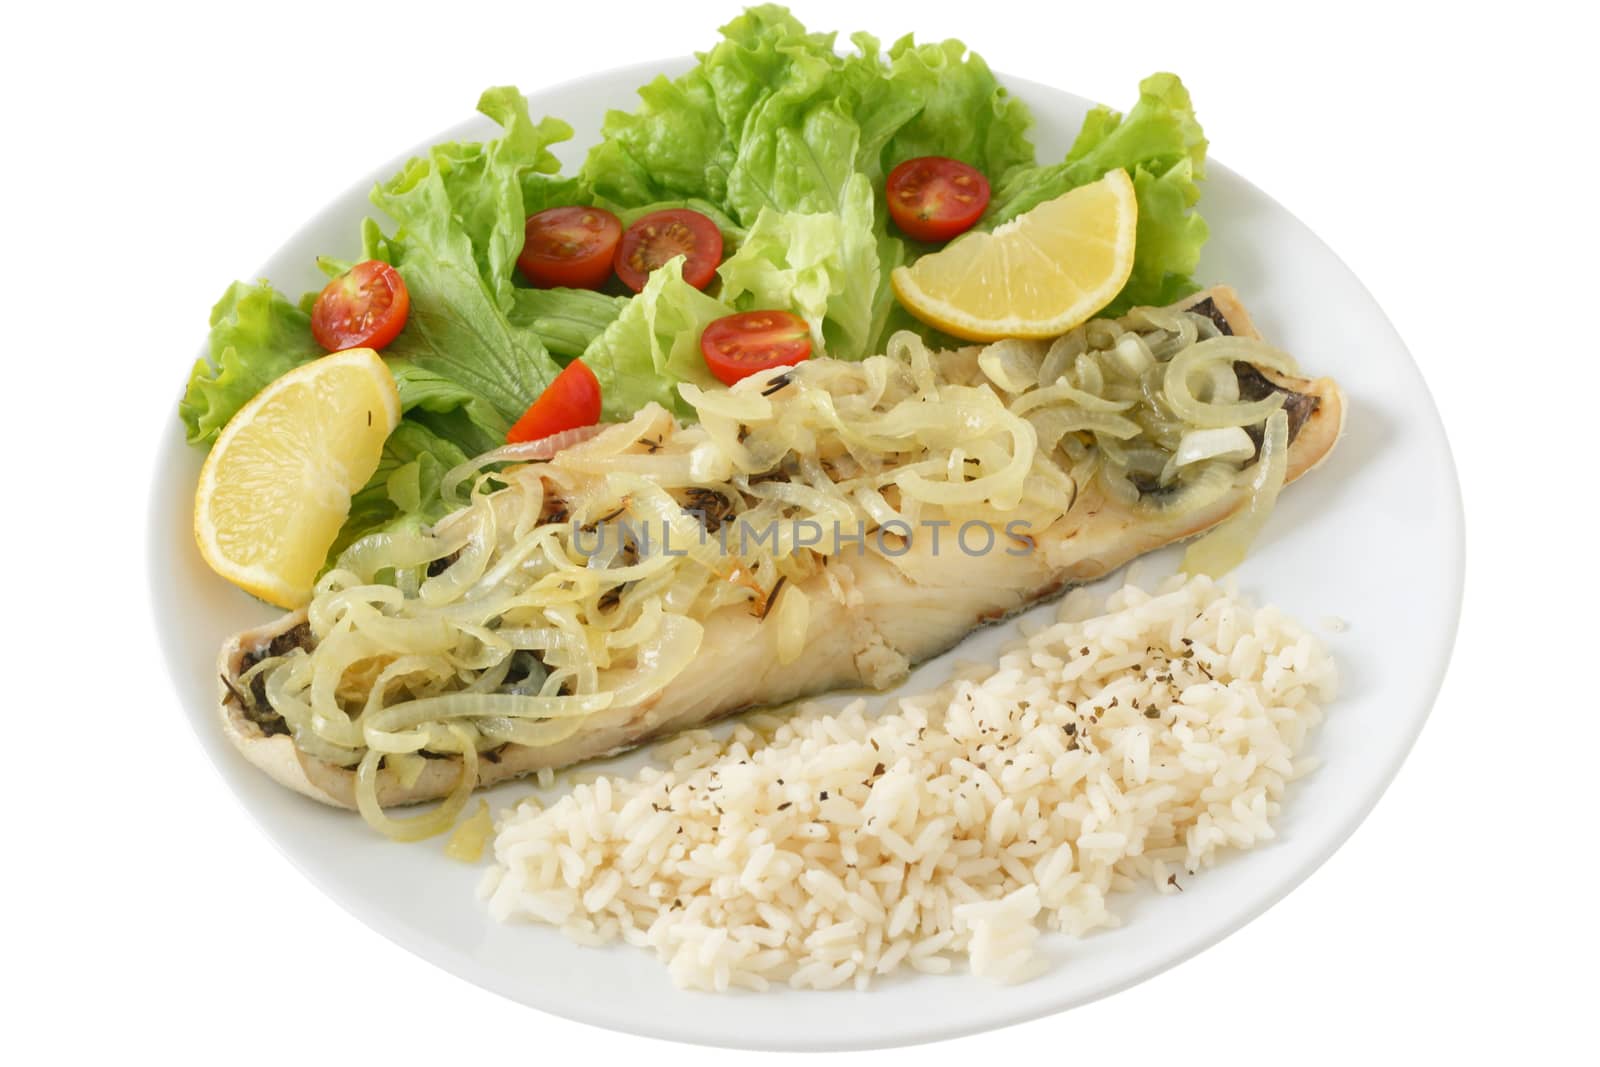 fried fish with salad and rice